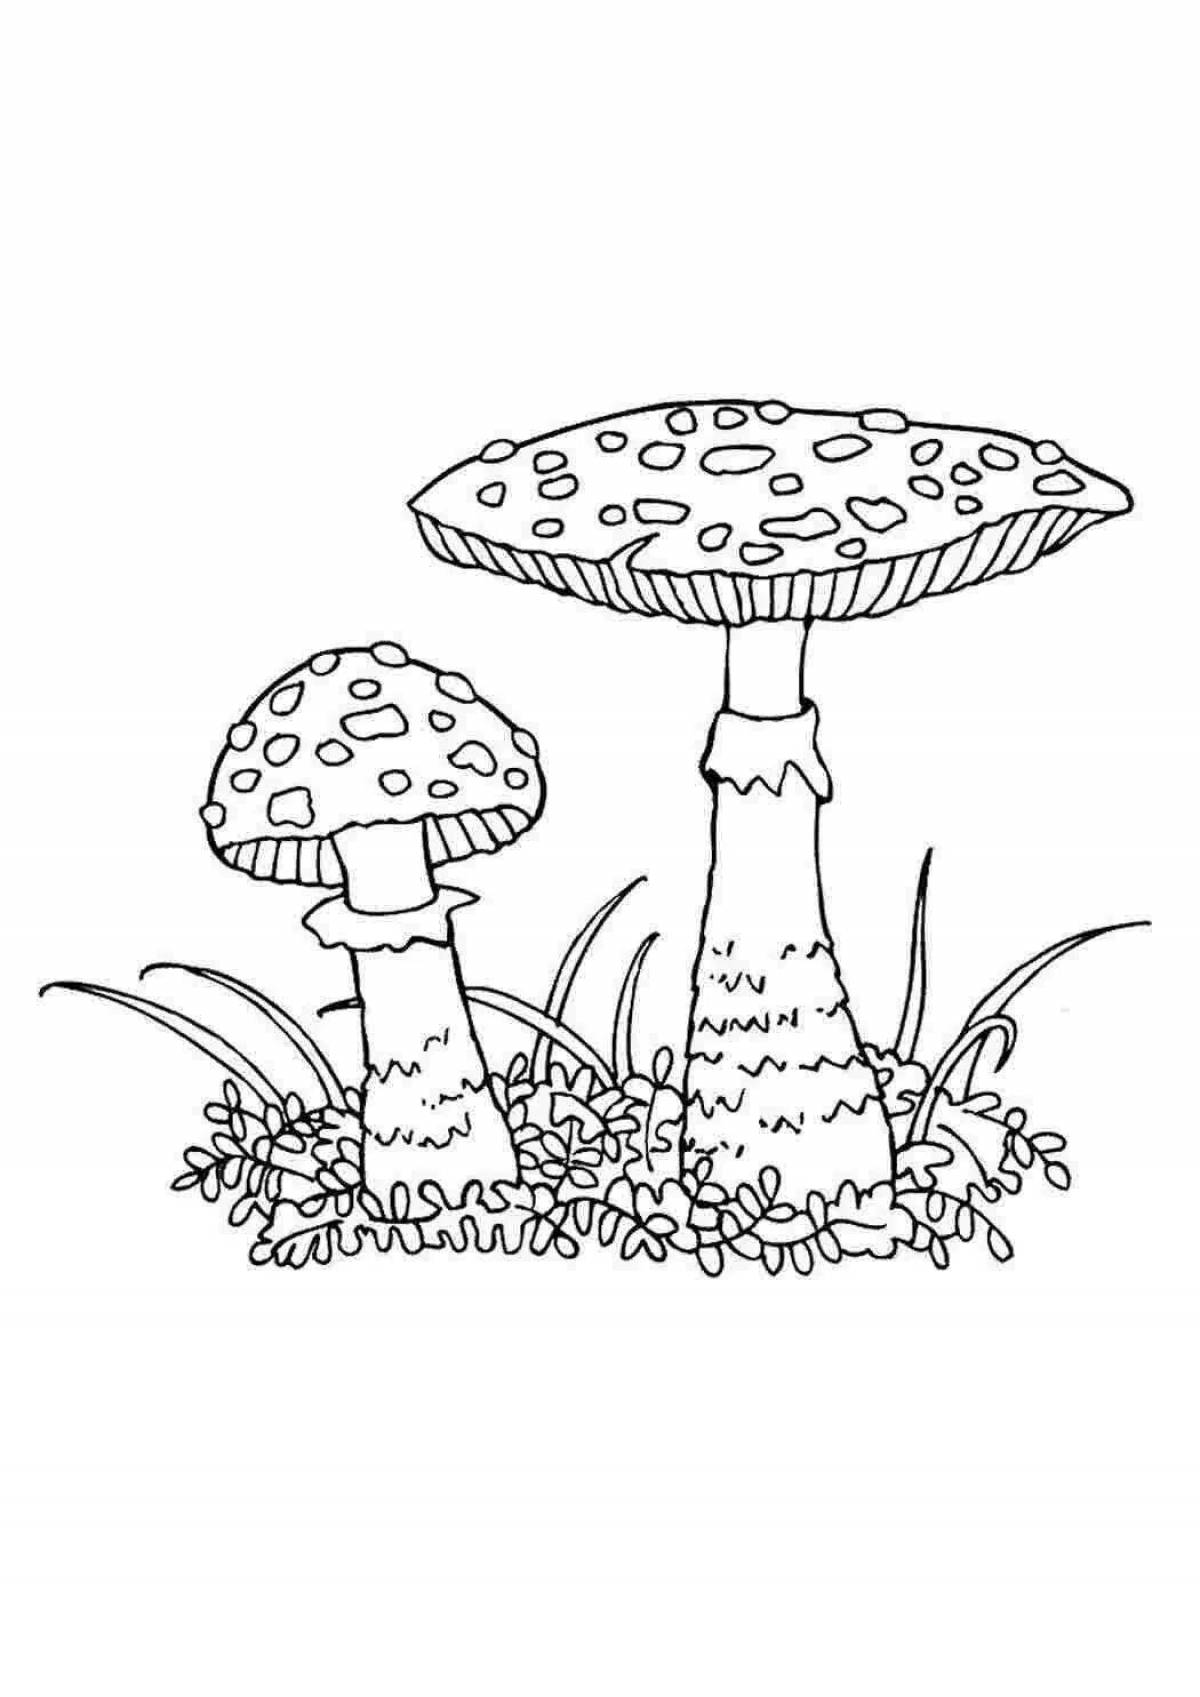 Outstanding fly agaric drawing for beginners